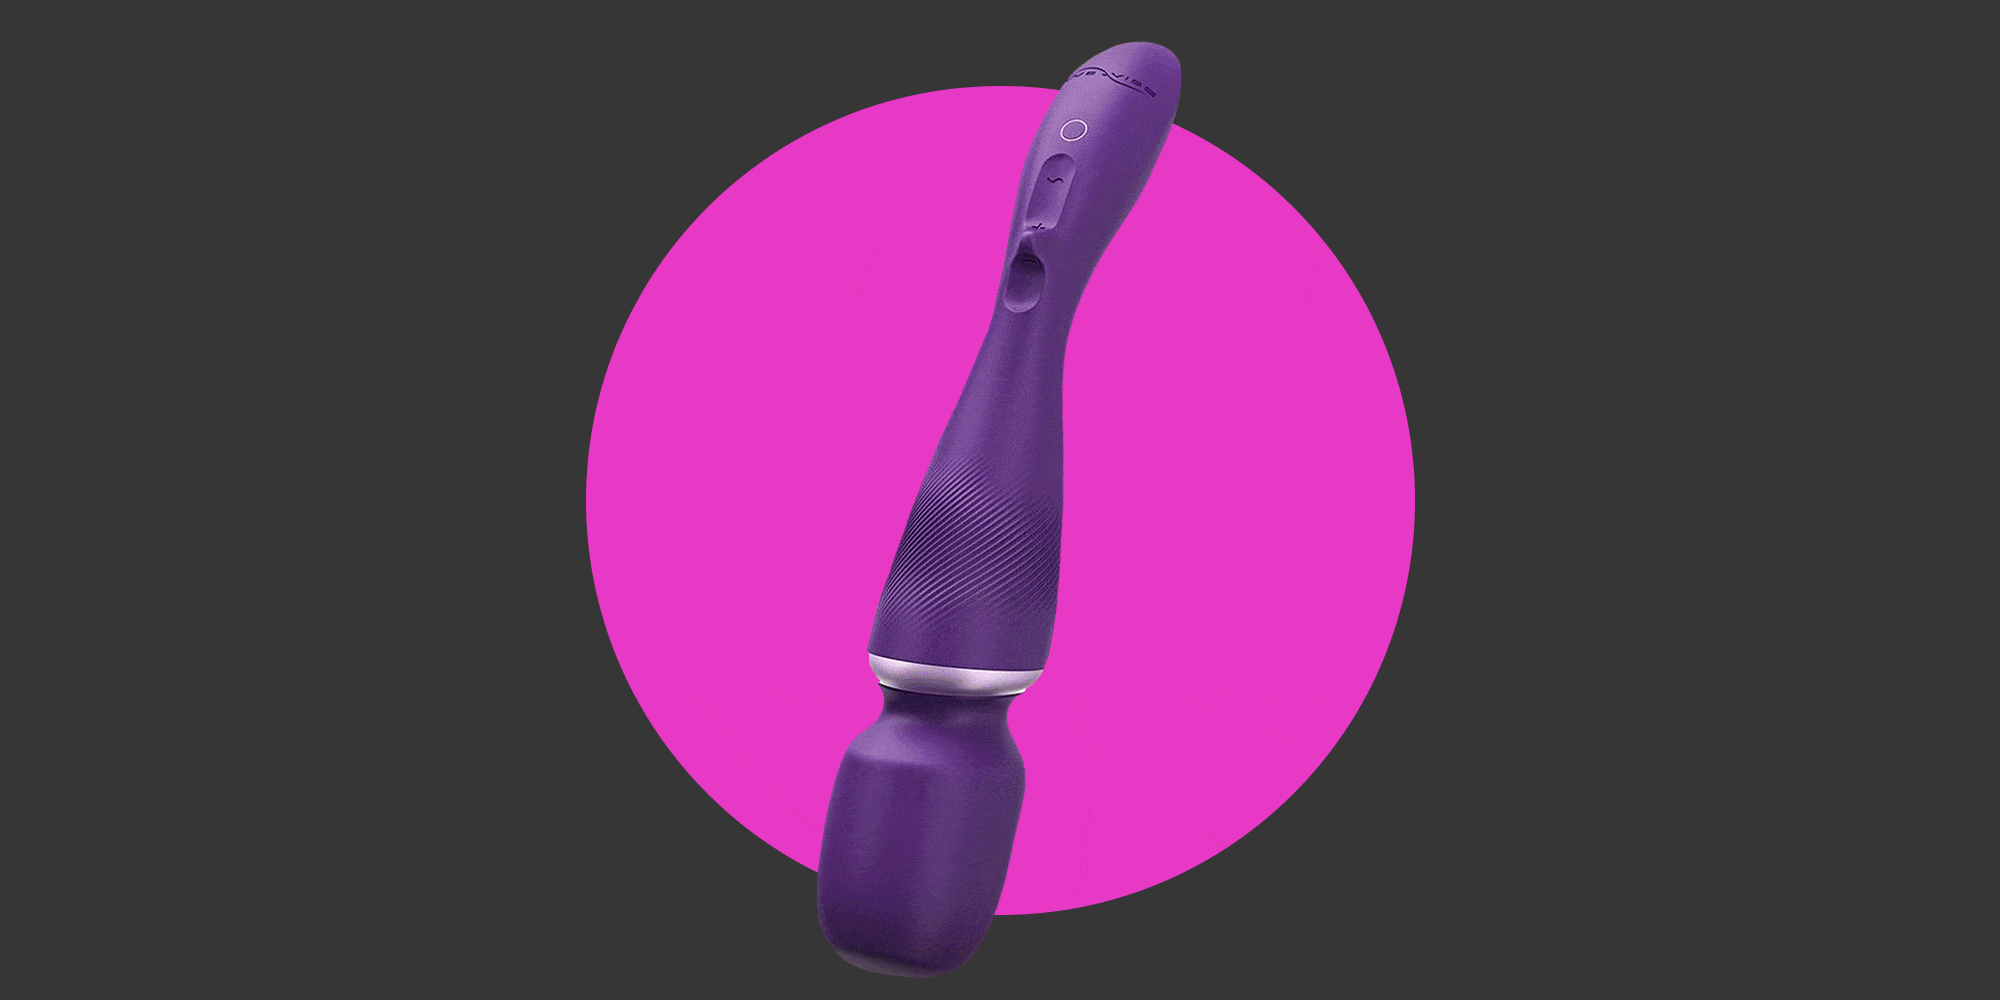 So happy to try my new purple toy